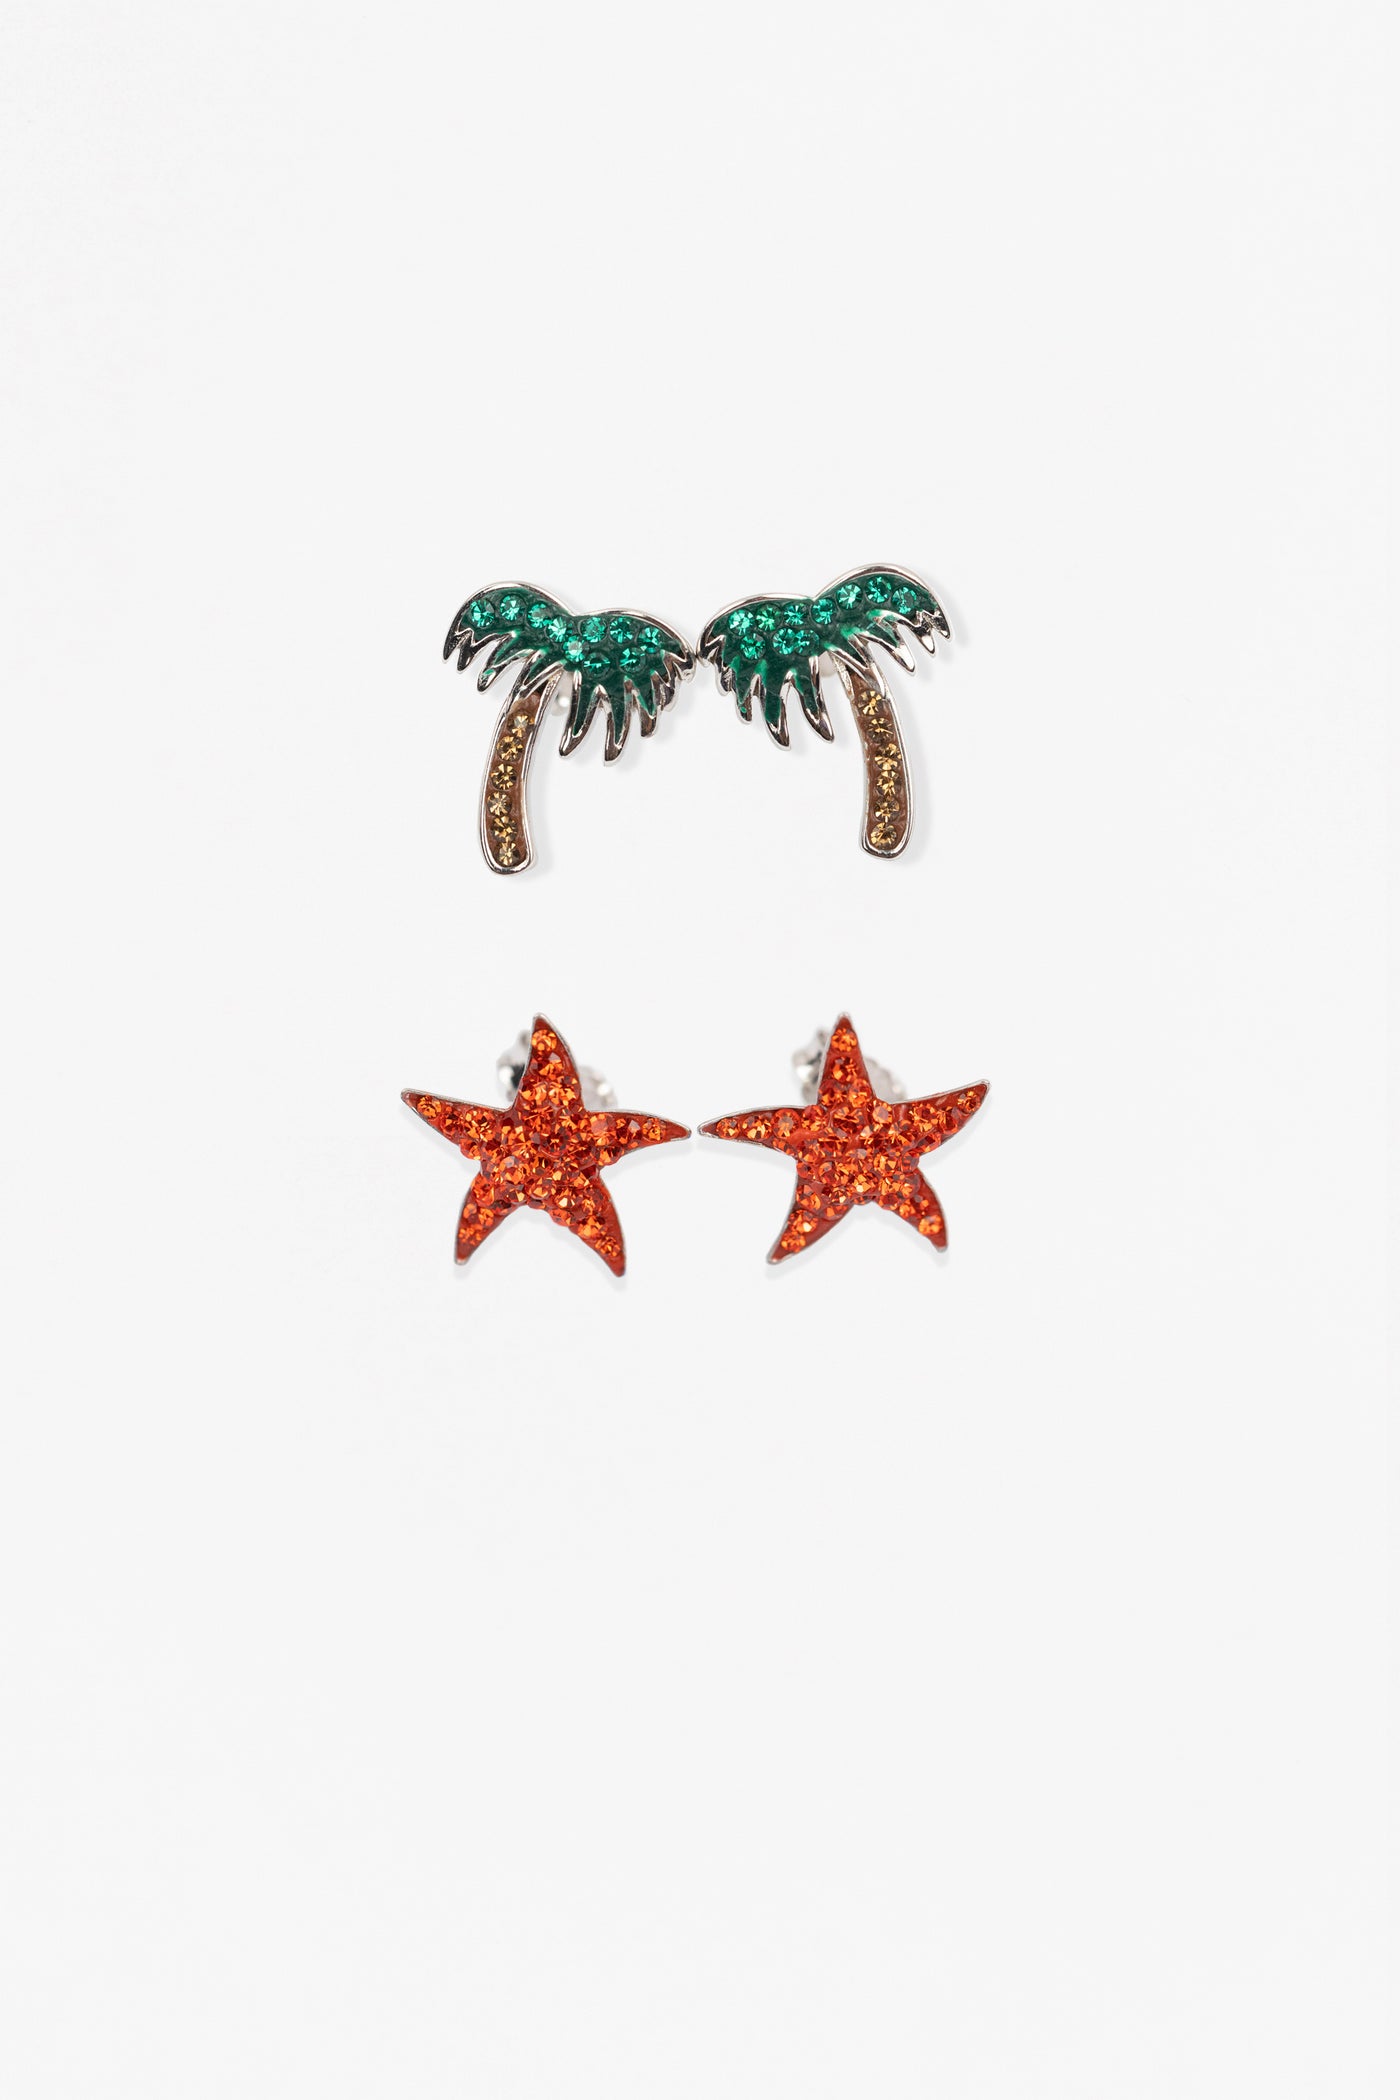 Starfish and Palm Tree Crystal Sterling Silver Two Pair Earrings Set